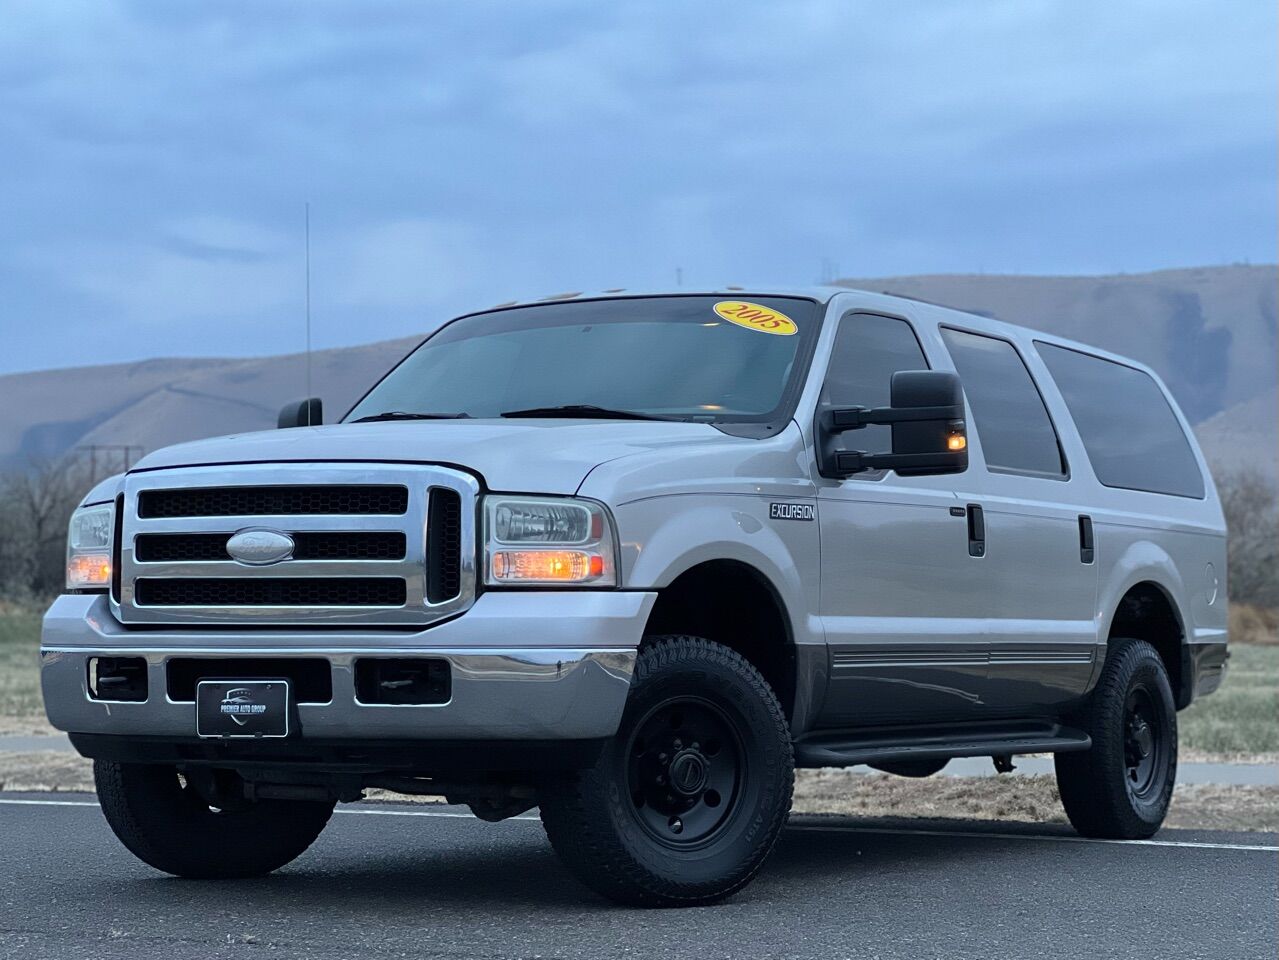 2005 Ford Excursion For Sale - Carsforsale.com®